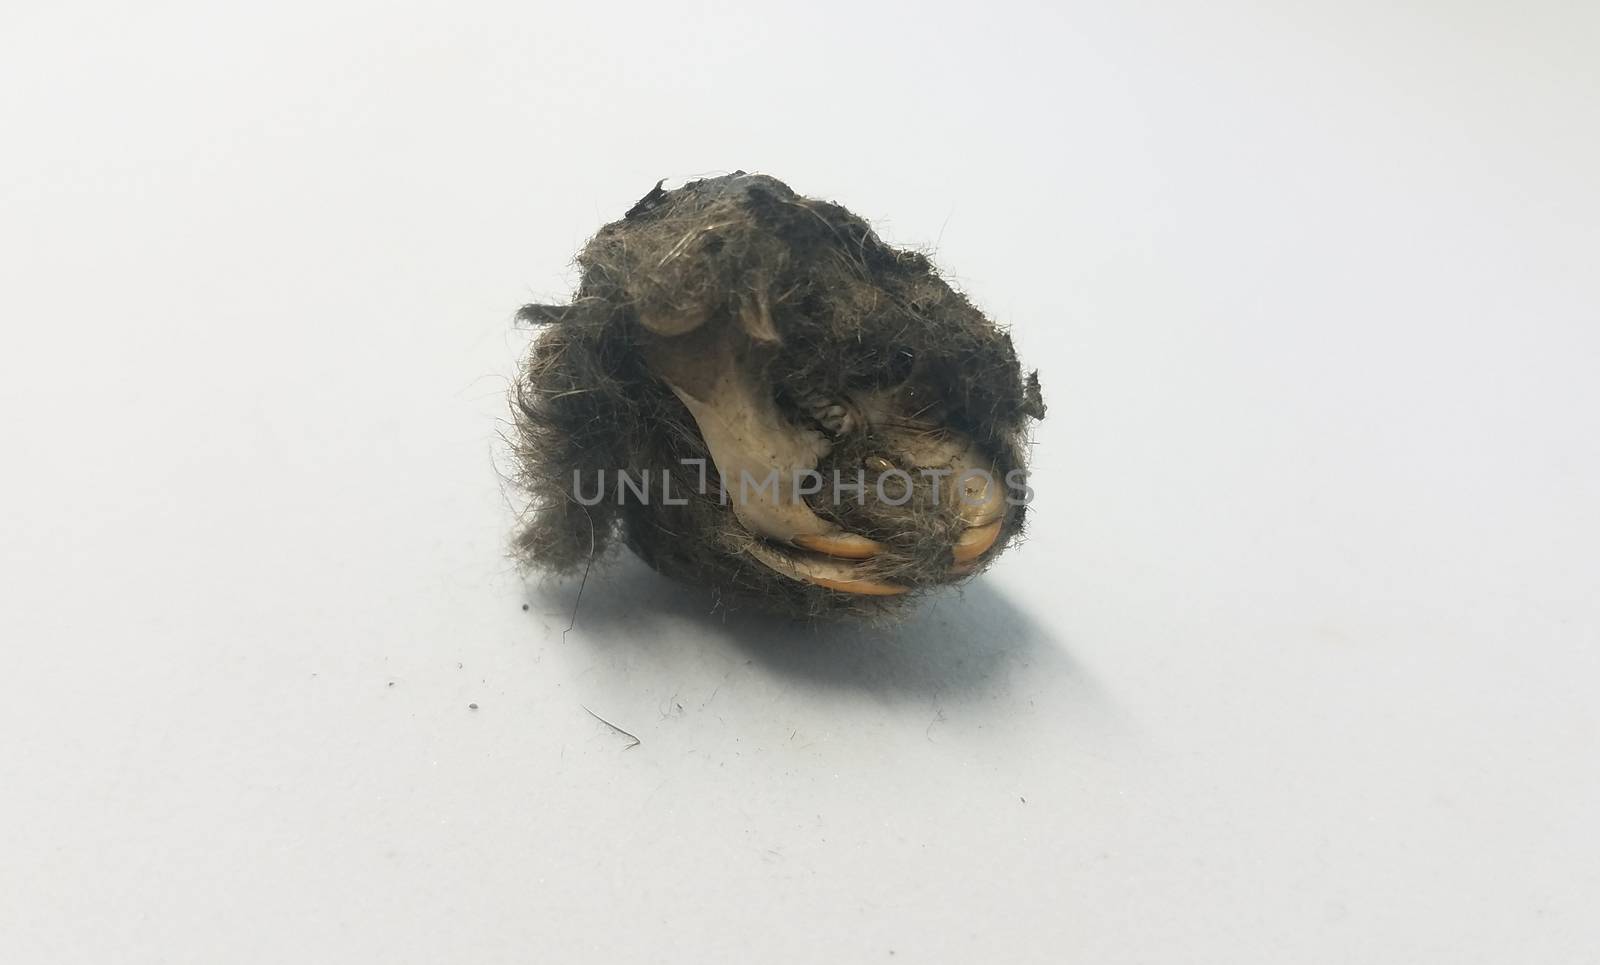 rat skull and jaw and teeth and black hair from owl pellet on white background